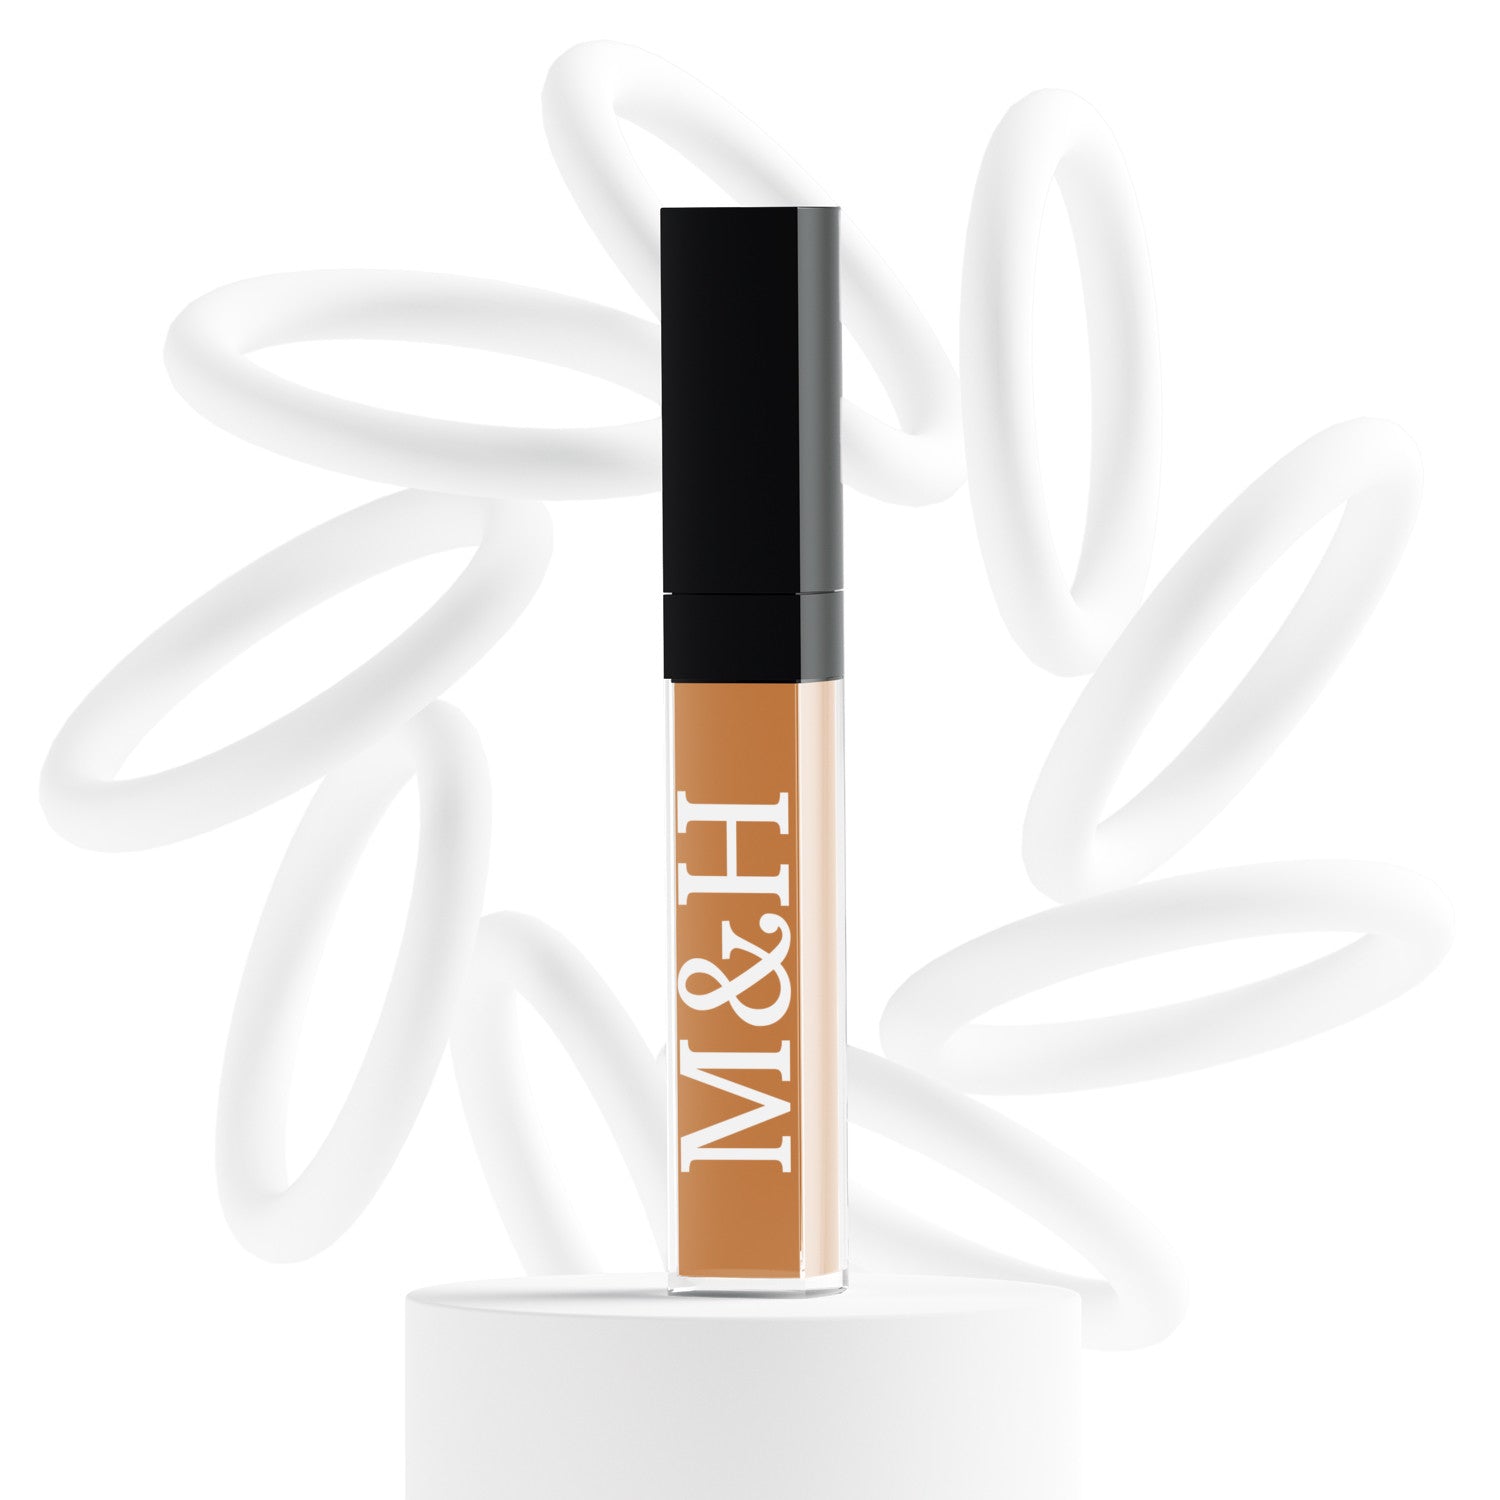 Cool-tone Concealers - M&H FashionCool-tone Concealersconcealer-coolM&H FashionM&H FashionConcealer-955AlmondCool-tone ConcealersM&H Fashionconcealer-coolM&H Fashion This multifunctional concealer is designed to cover under-eye circles, complexion alterations, and major imperfections like scars, hyperpigmentation, burns, and tatCool-tone Concealers